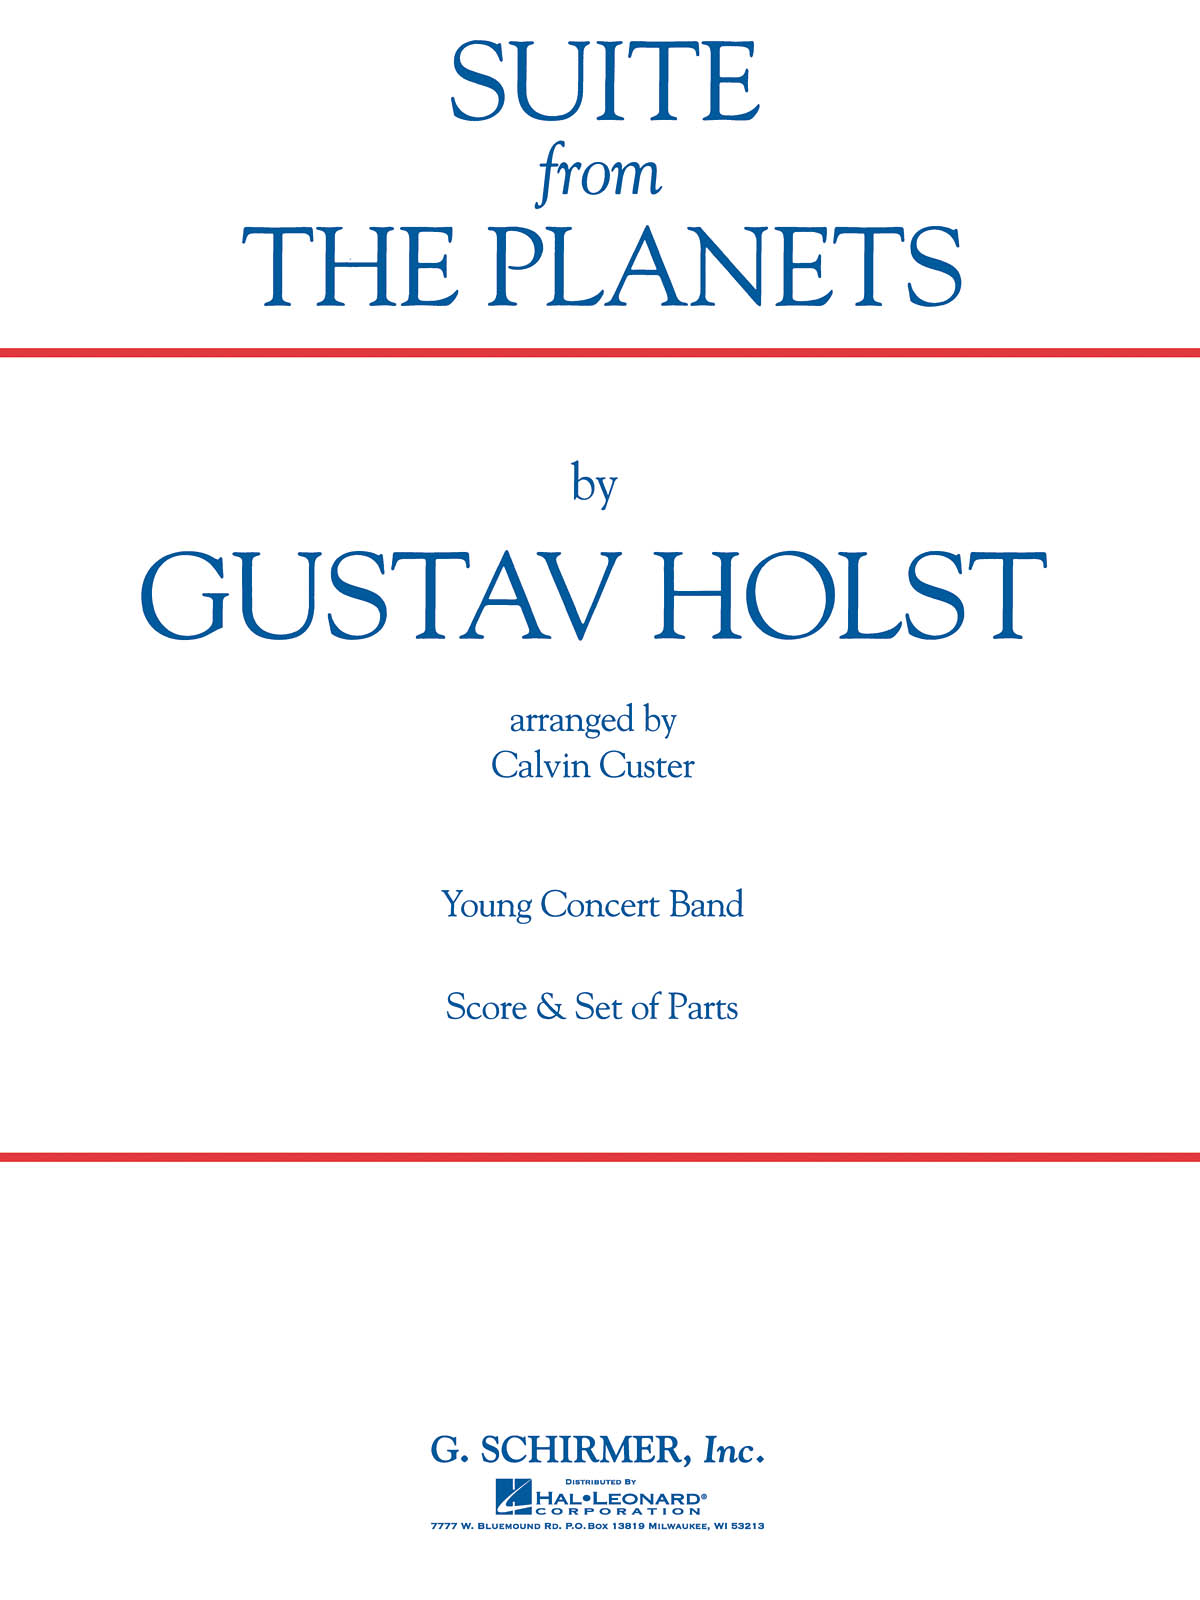 Gustav Holst: Suite (from The Planets): Concert Band: Score & Parts